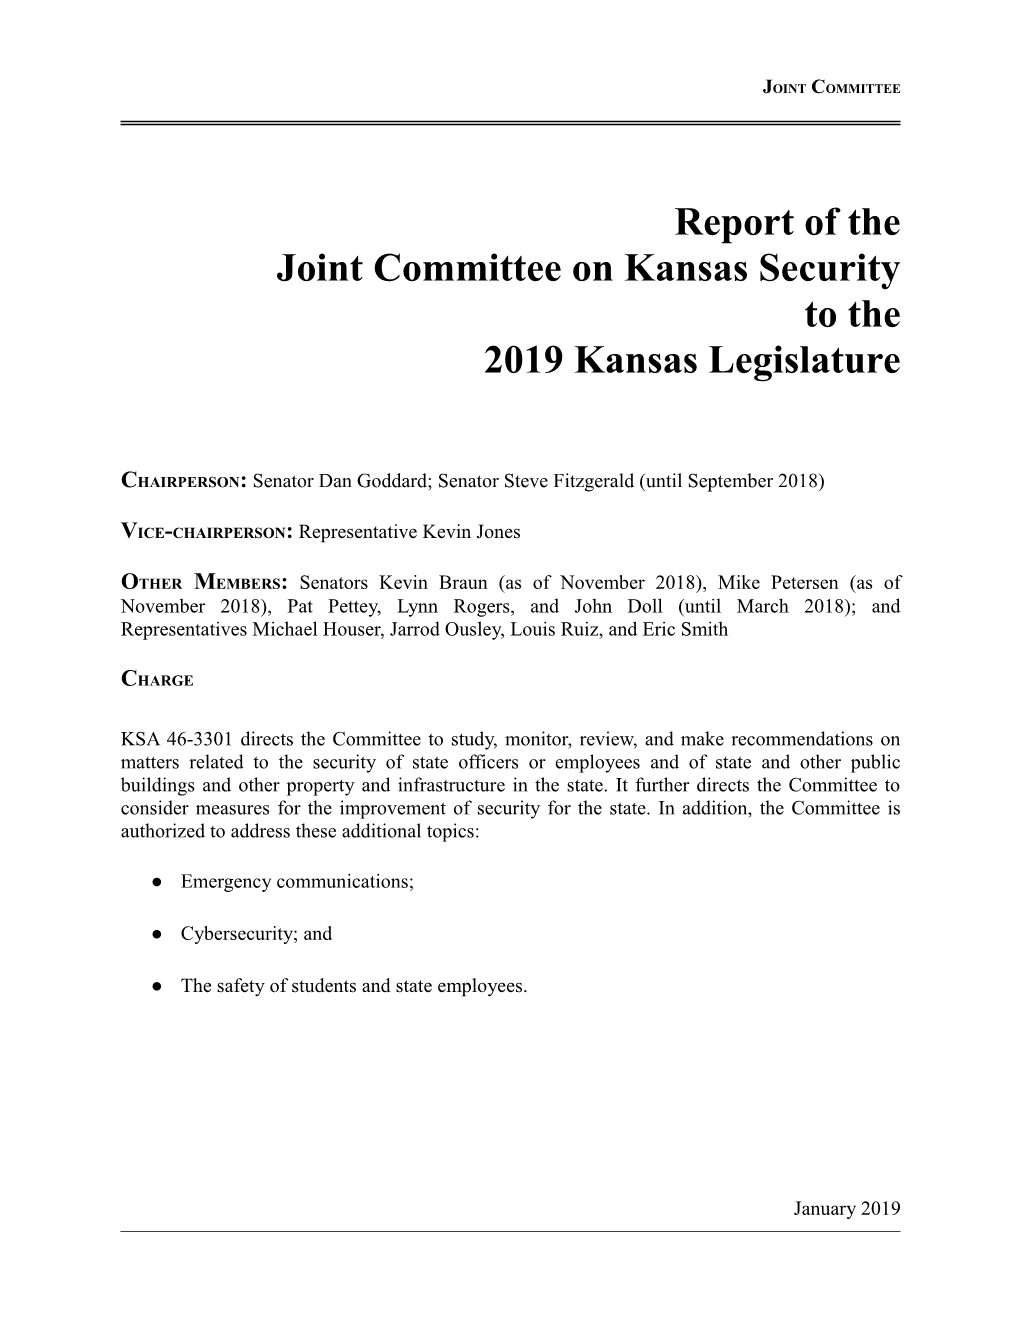 Report of the Joint Committee on Kansas Security to the 2019 Kansas Legislature